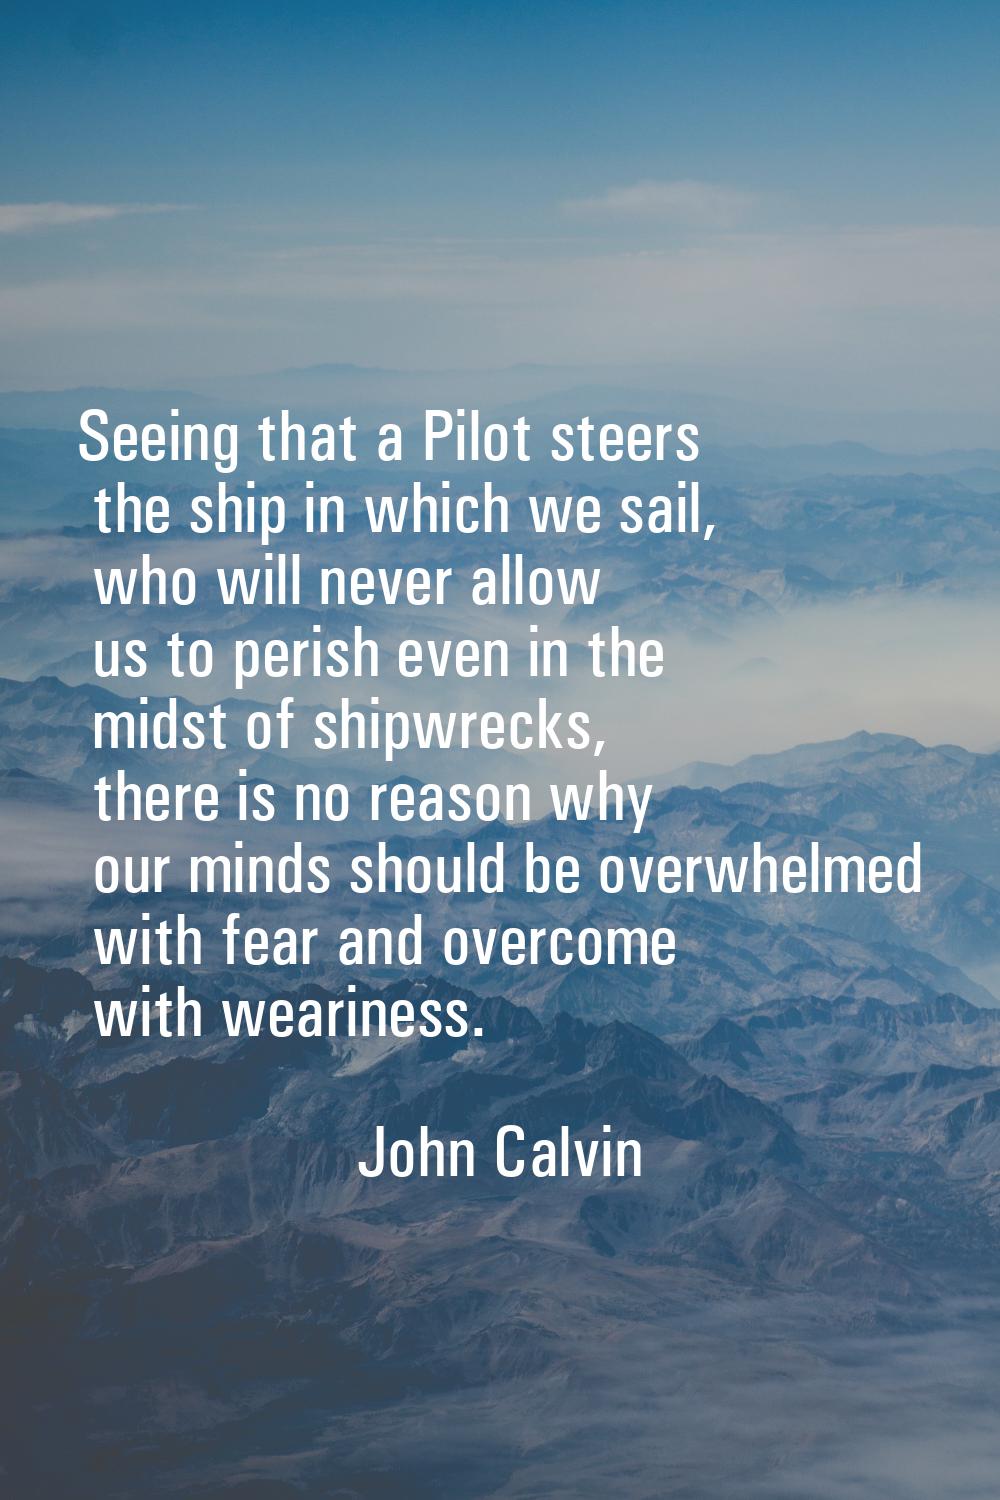 Seeing that a Pilot steers the ship in which we sail, who will never allow us to perish even in the